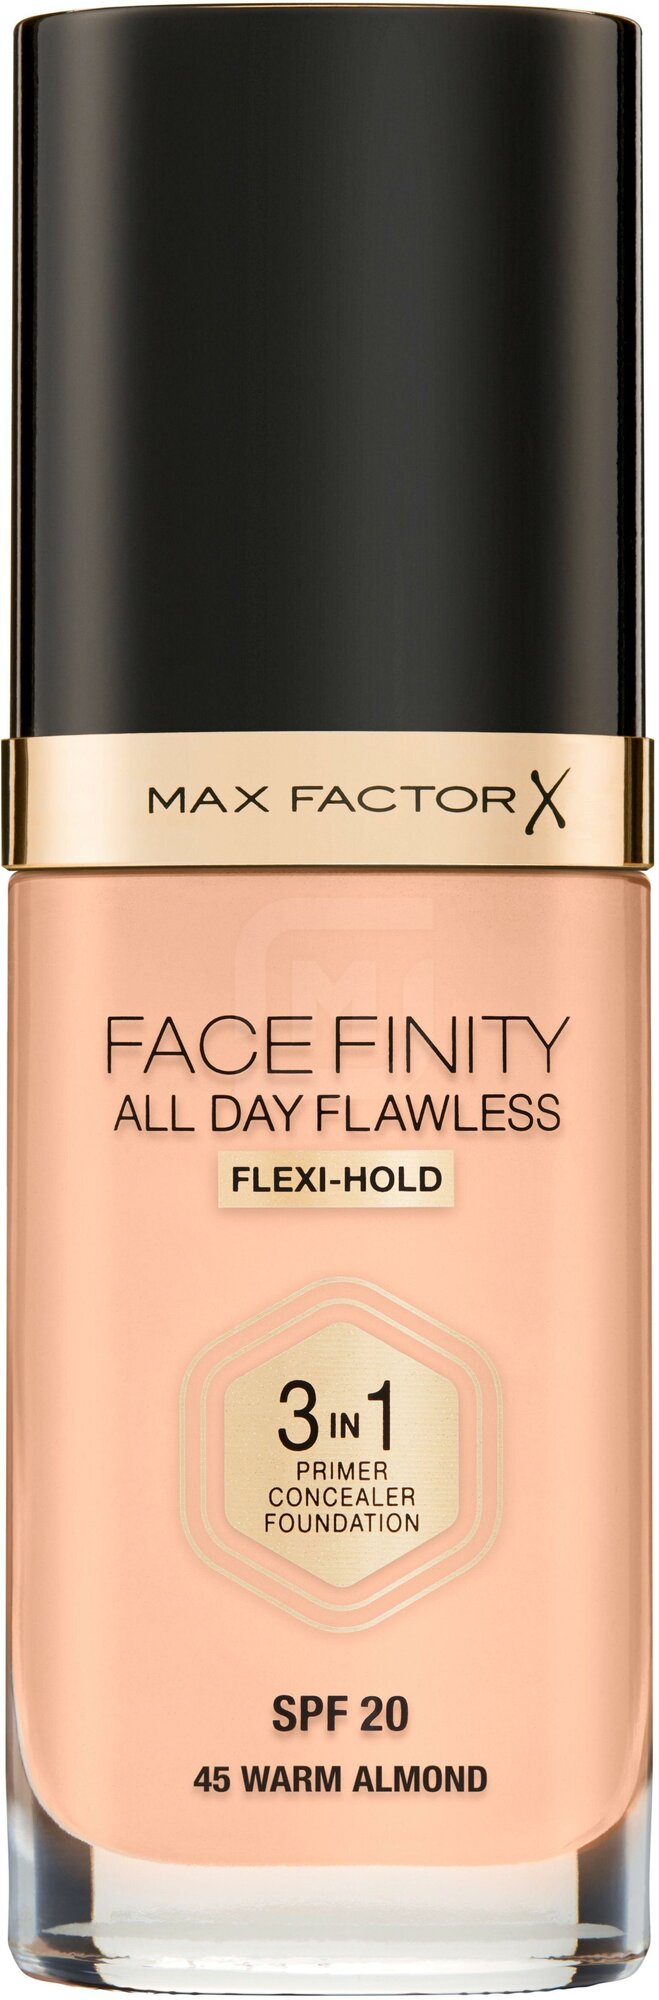 Max Factor Тональная Основа Facefinity All Day Flawless 3-in-1 Товар 50 тон natural HFC Prestige International IE - фото №13